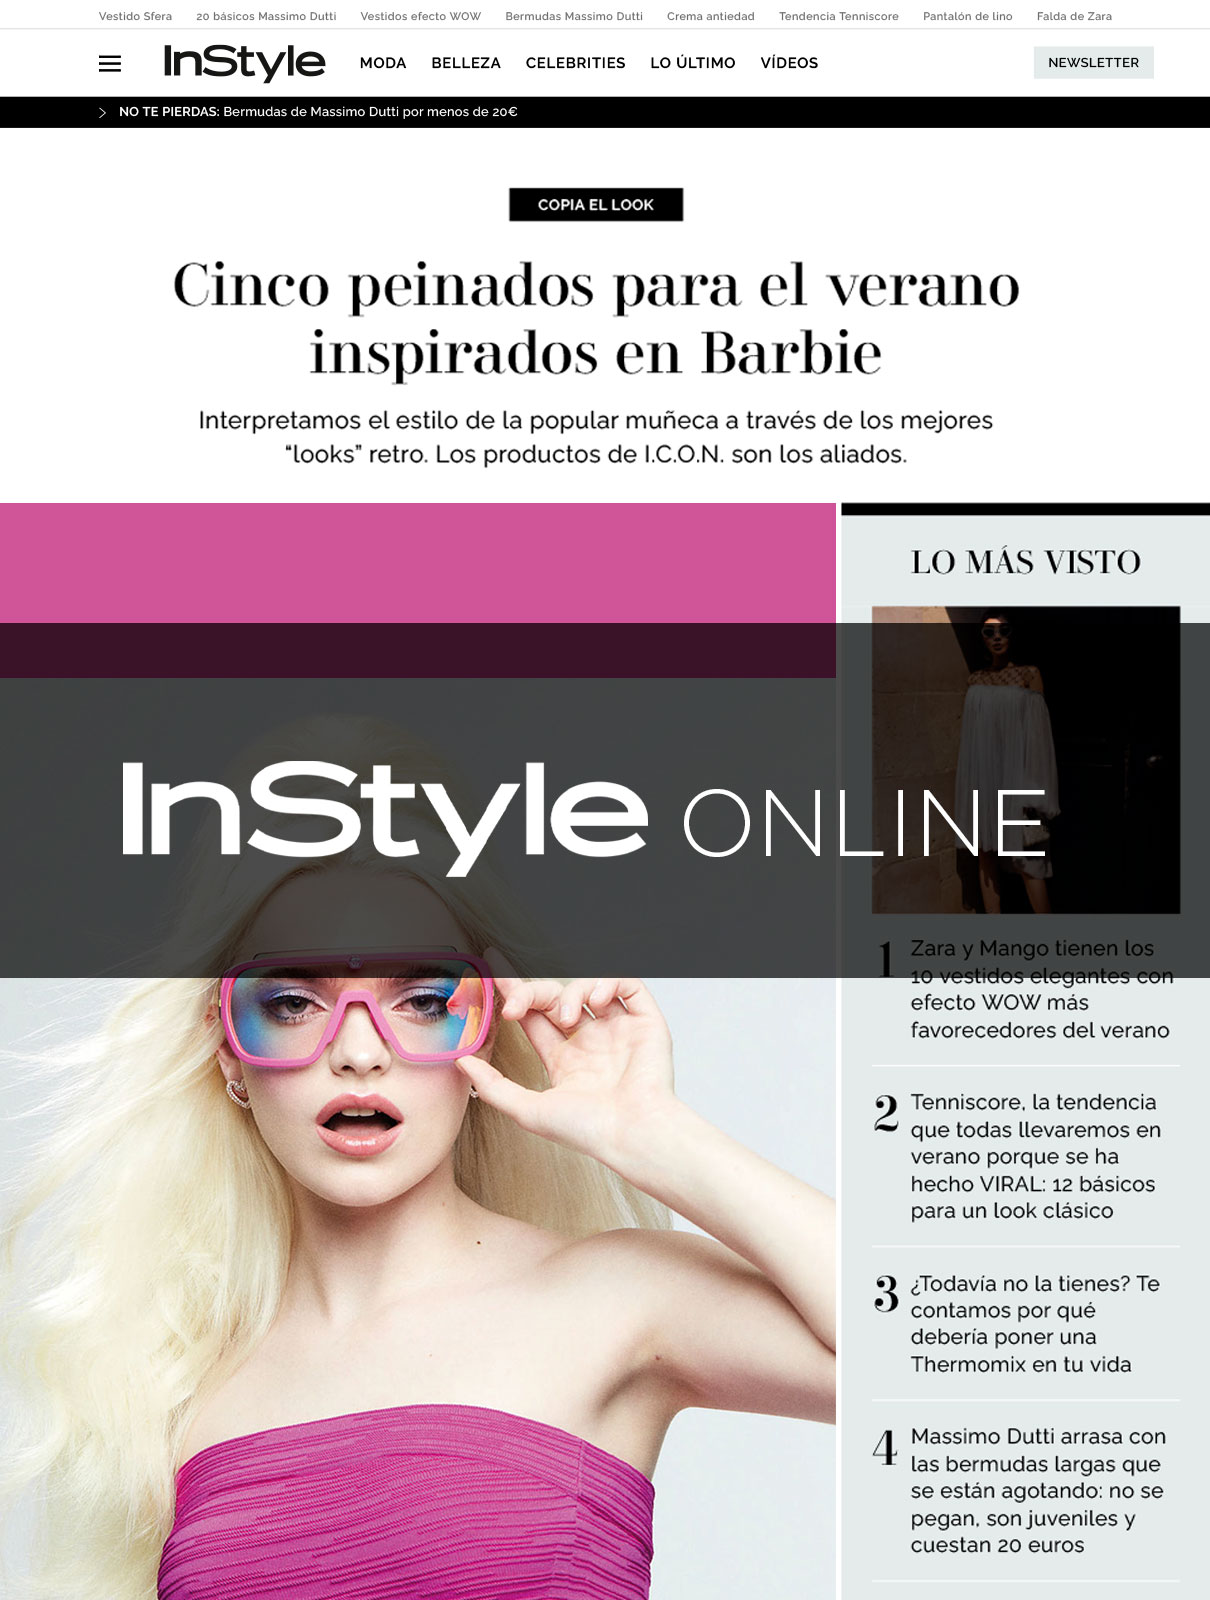 INSTYLE online